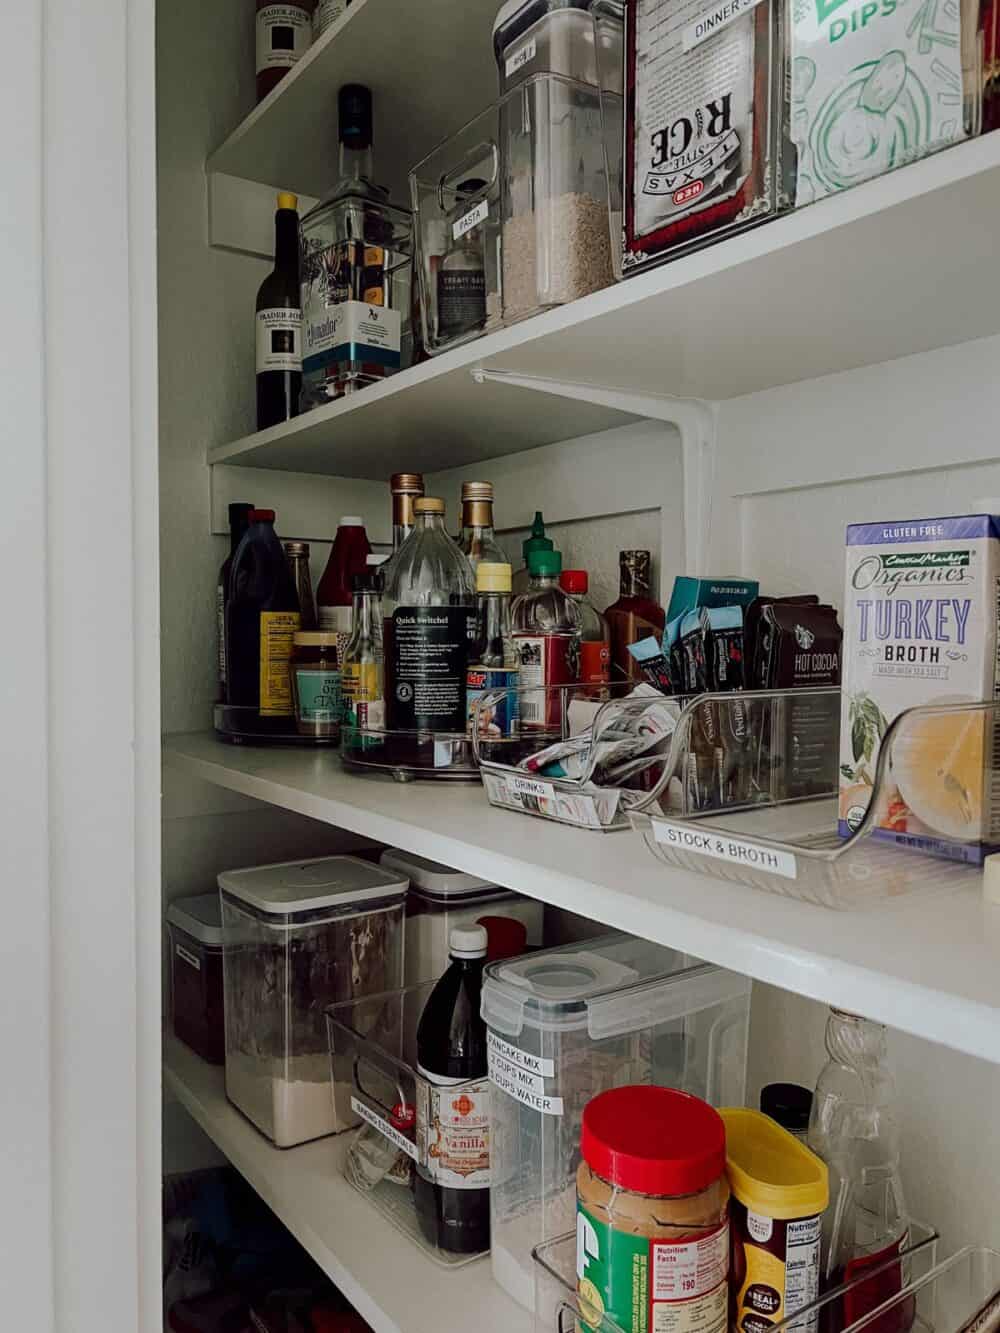 Kitchen storage idea for cups and drink bottles cupboard